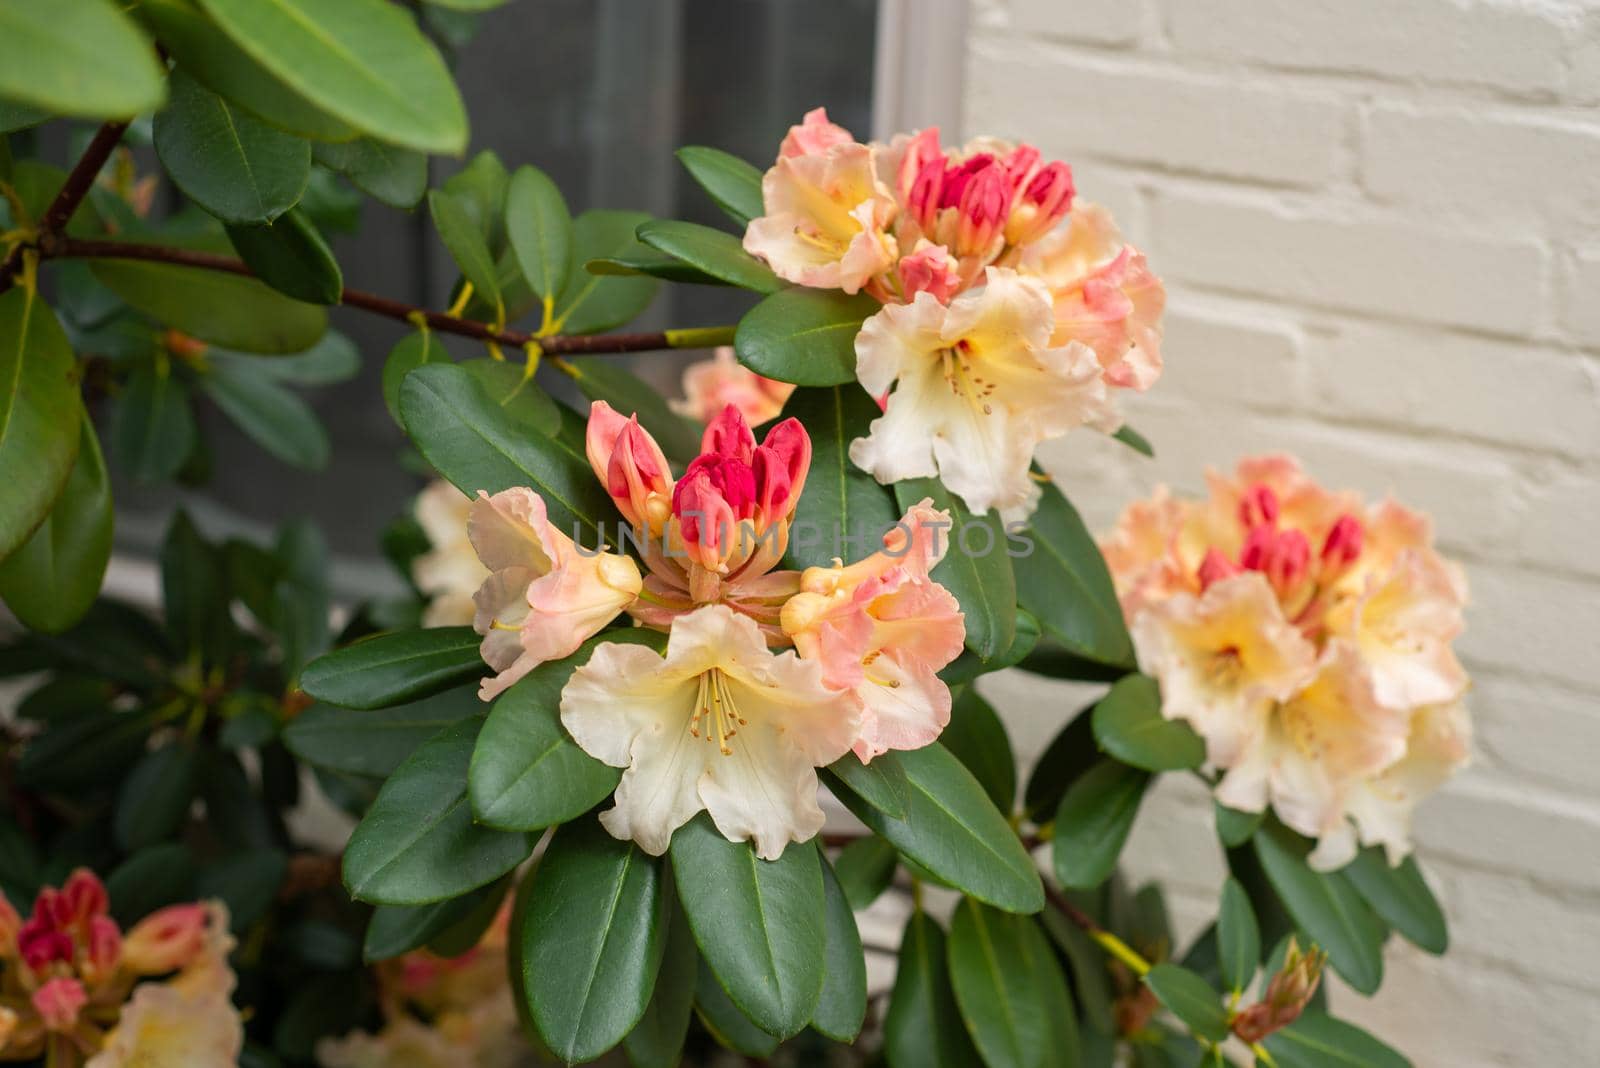 rhododendron blooming with yellow-pink flower buds in the spring garden